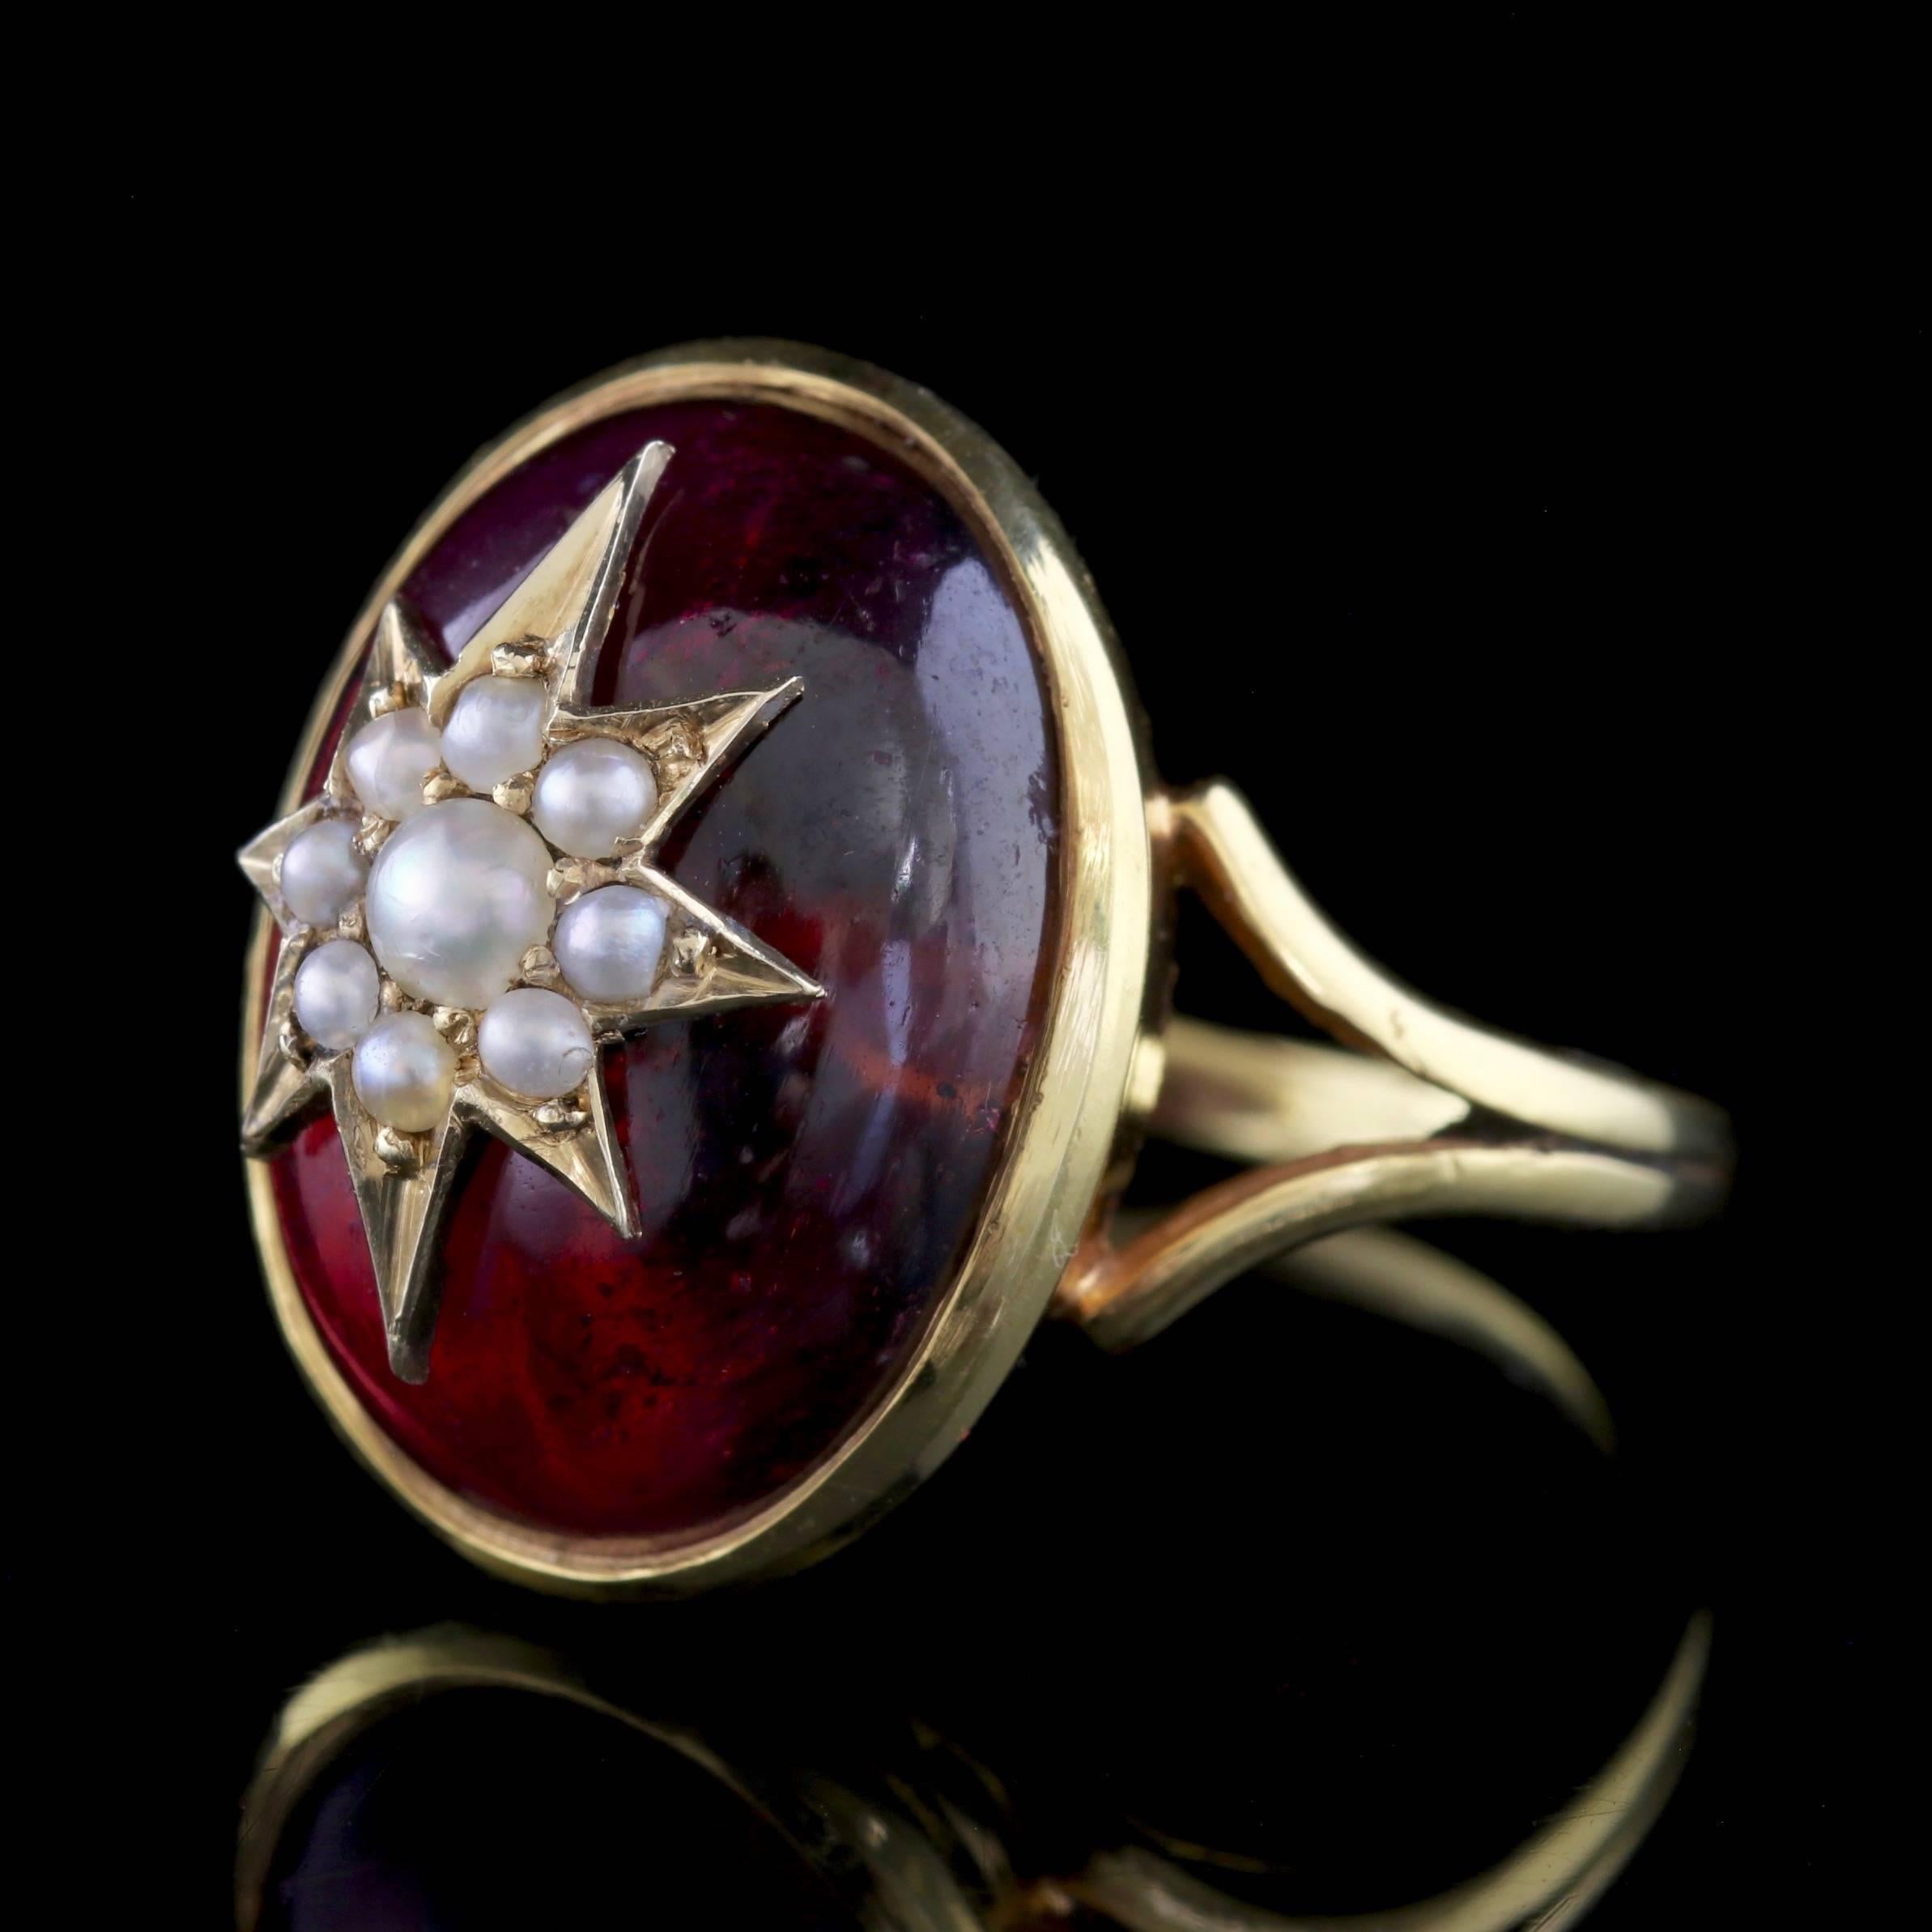 To read more please click continue reading below-

This fabulous antique 18ct Yellow Gold Garnet ring is Victorian Circa 1880. 

The ring boasts a large cabochon Almandine Garnet which is crowned with a Pearl encrusted star.

Almandine Garnet’s are